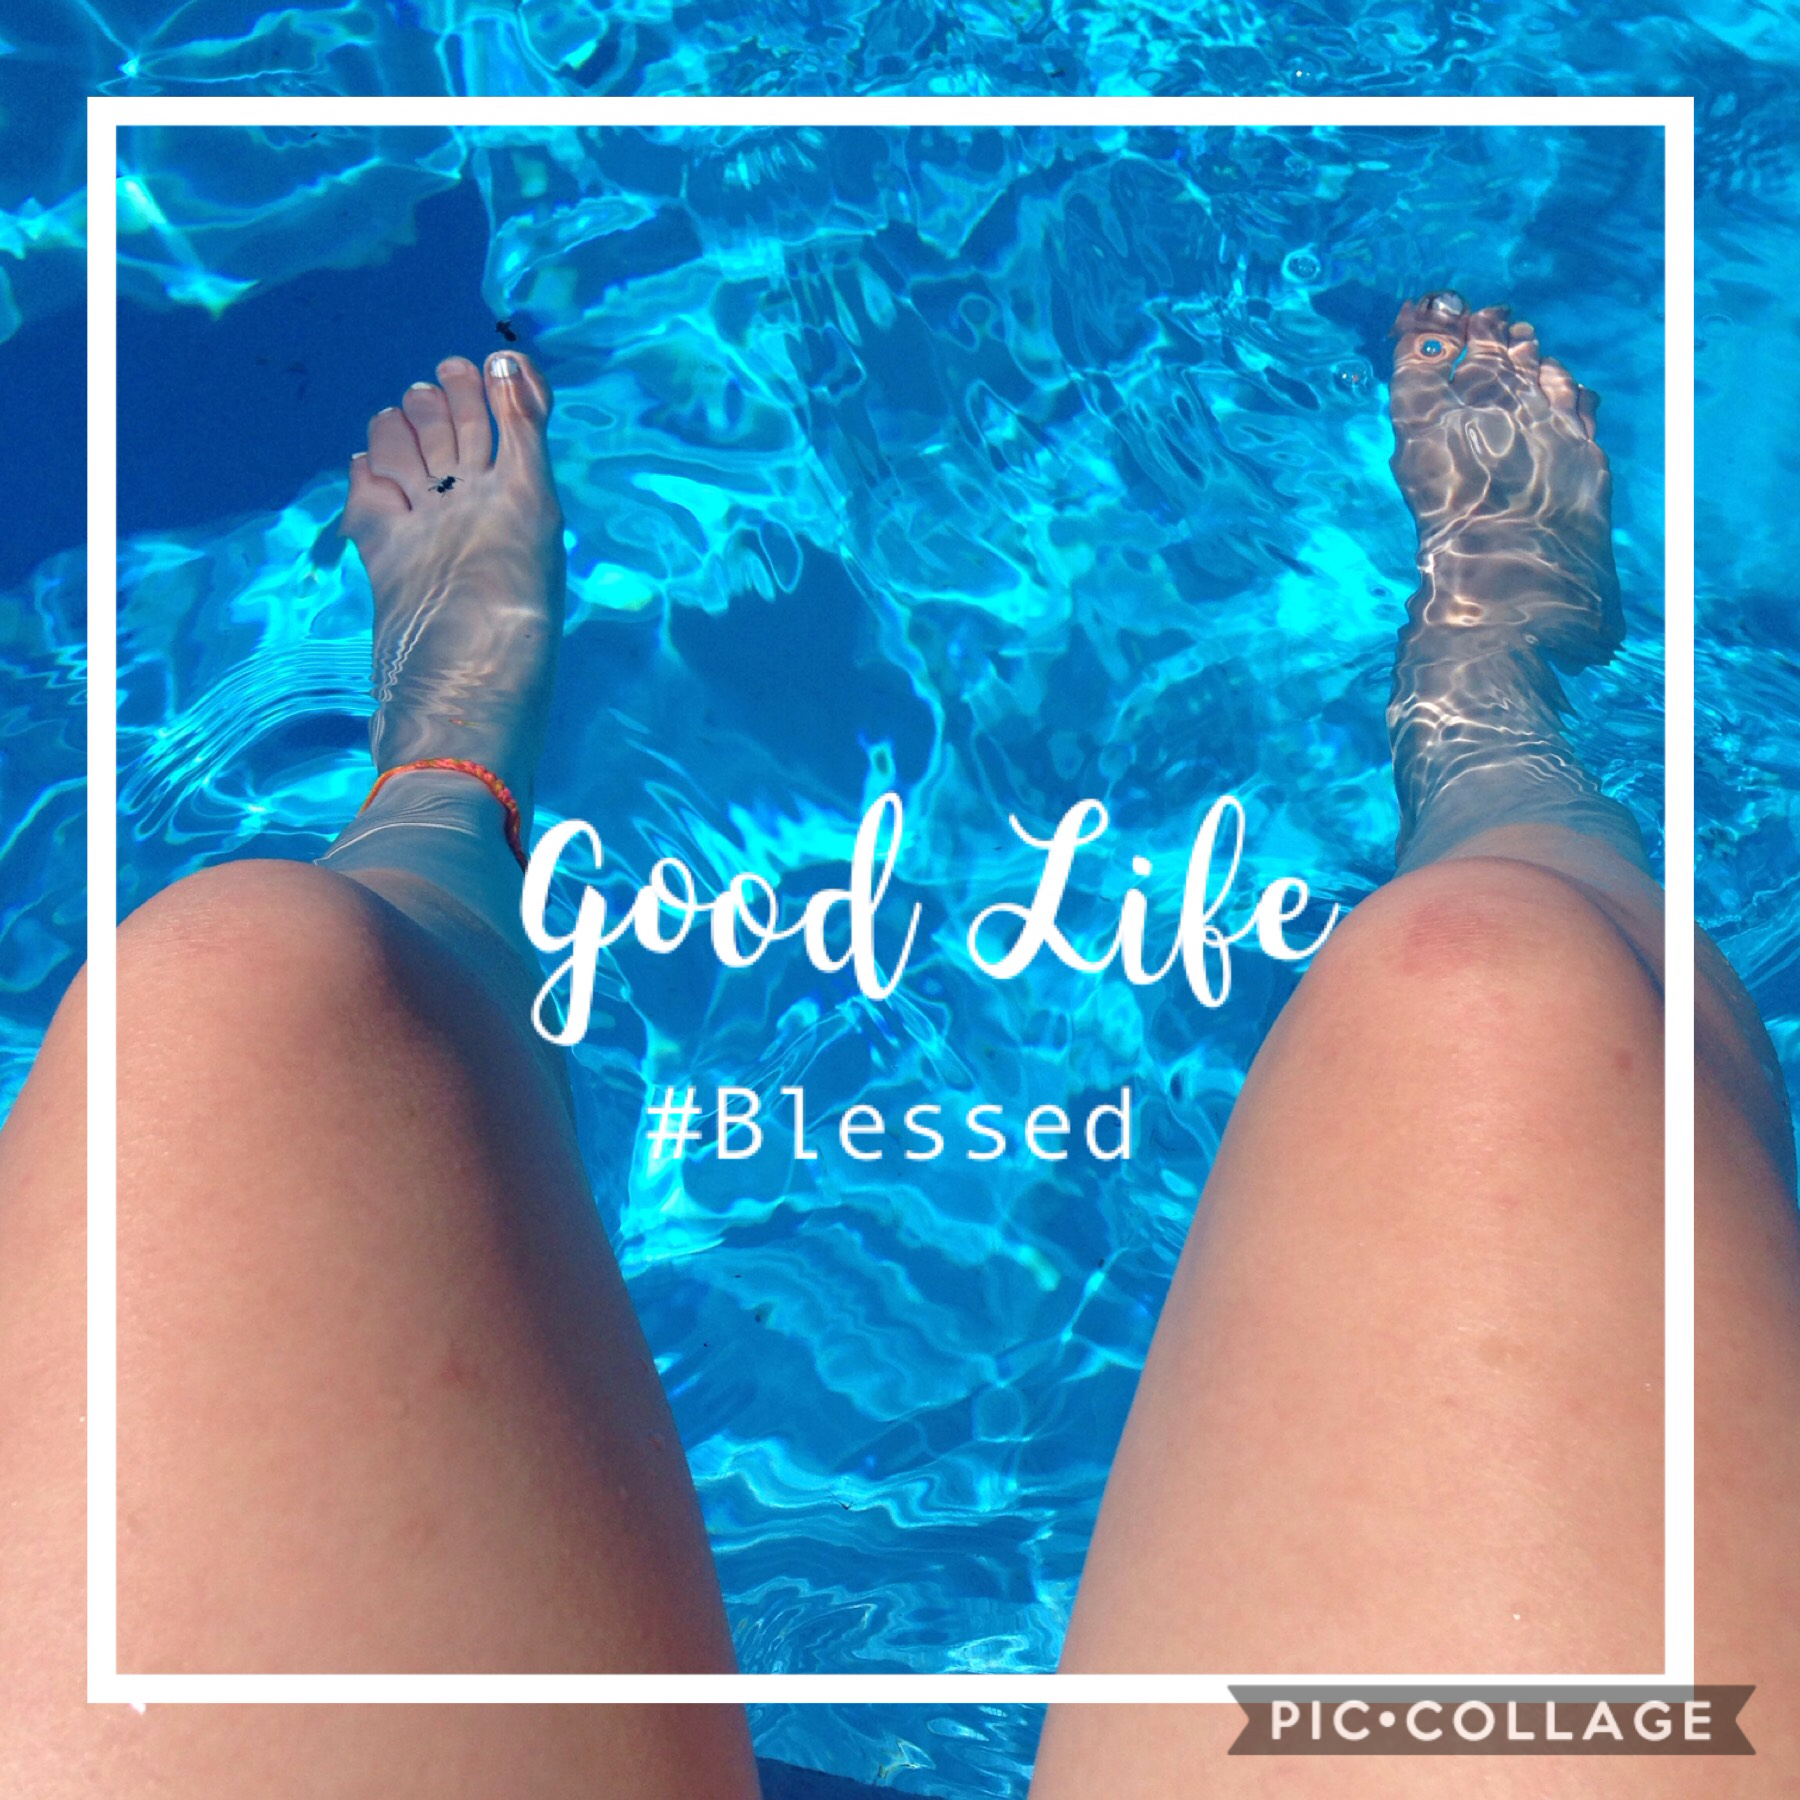 A good life is a blessed life!